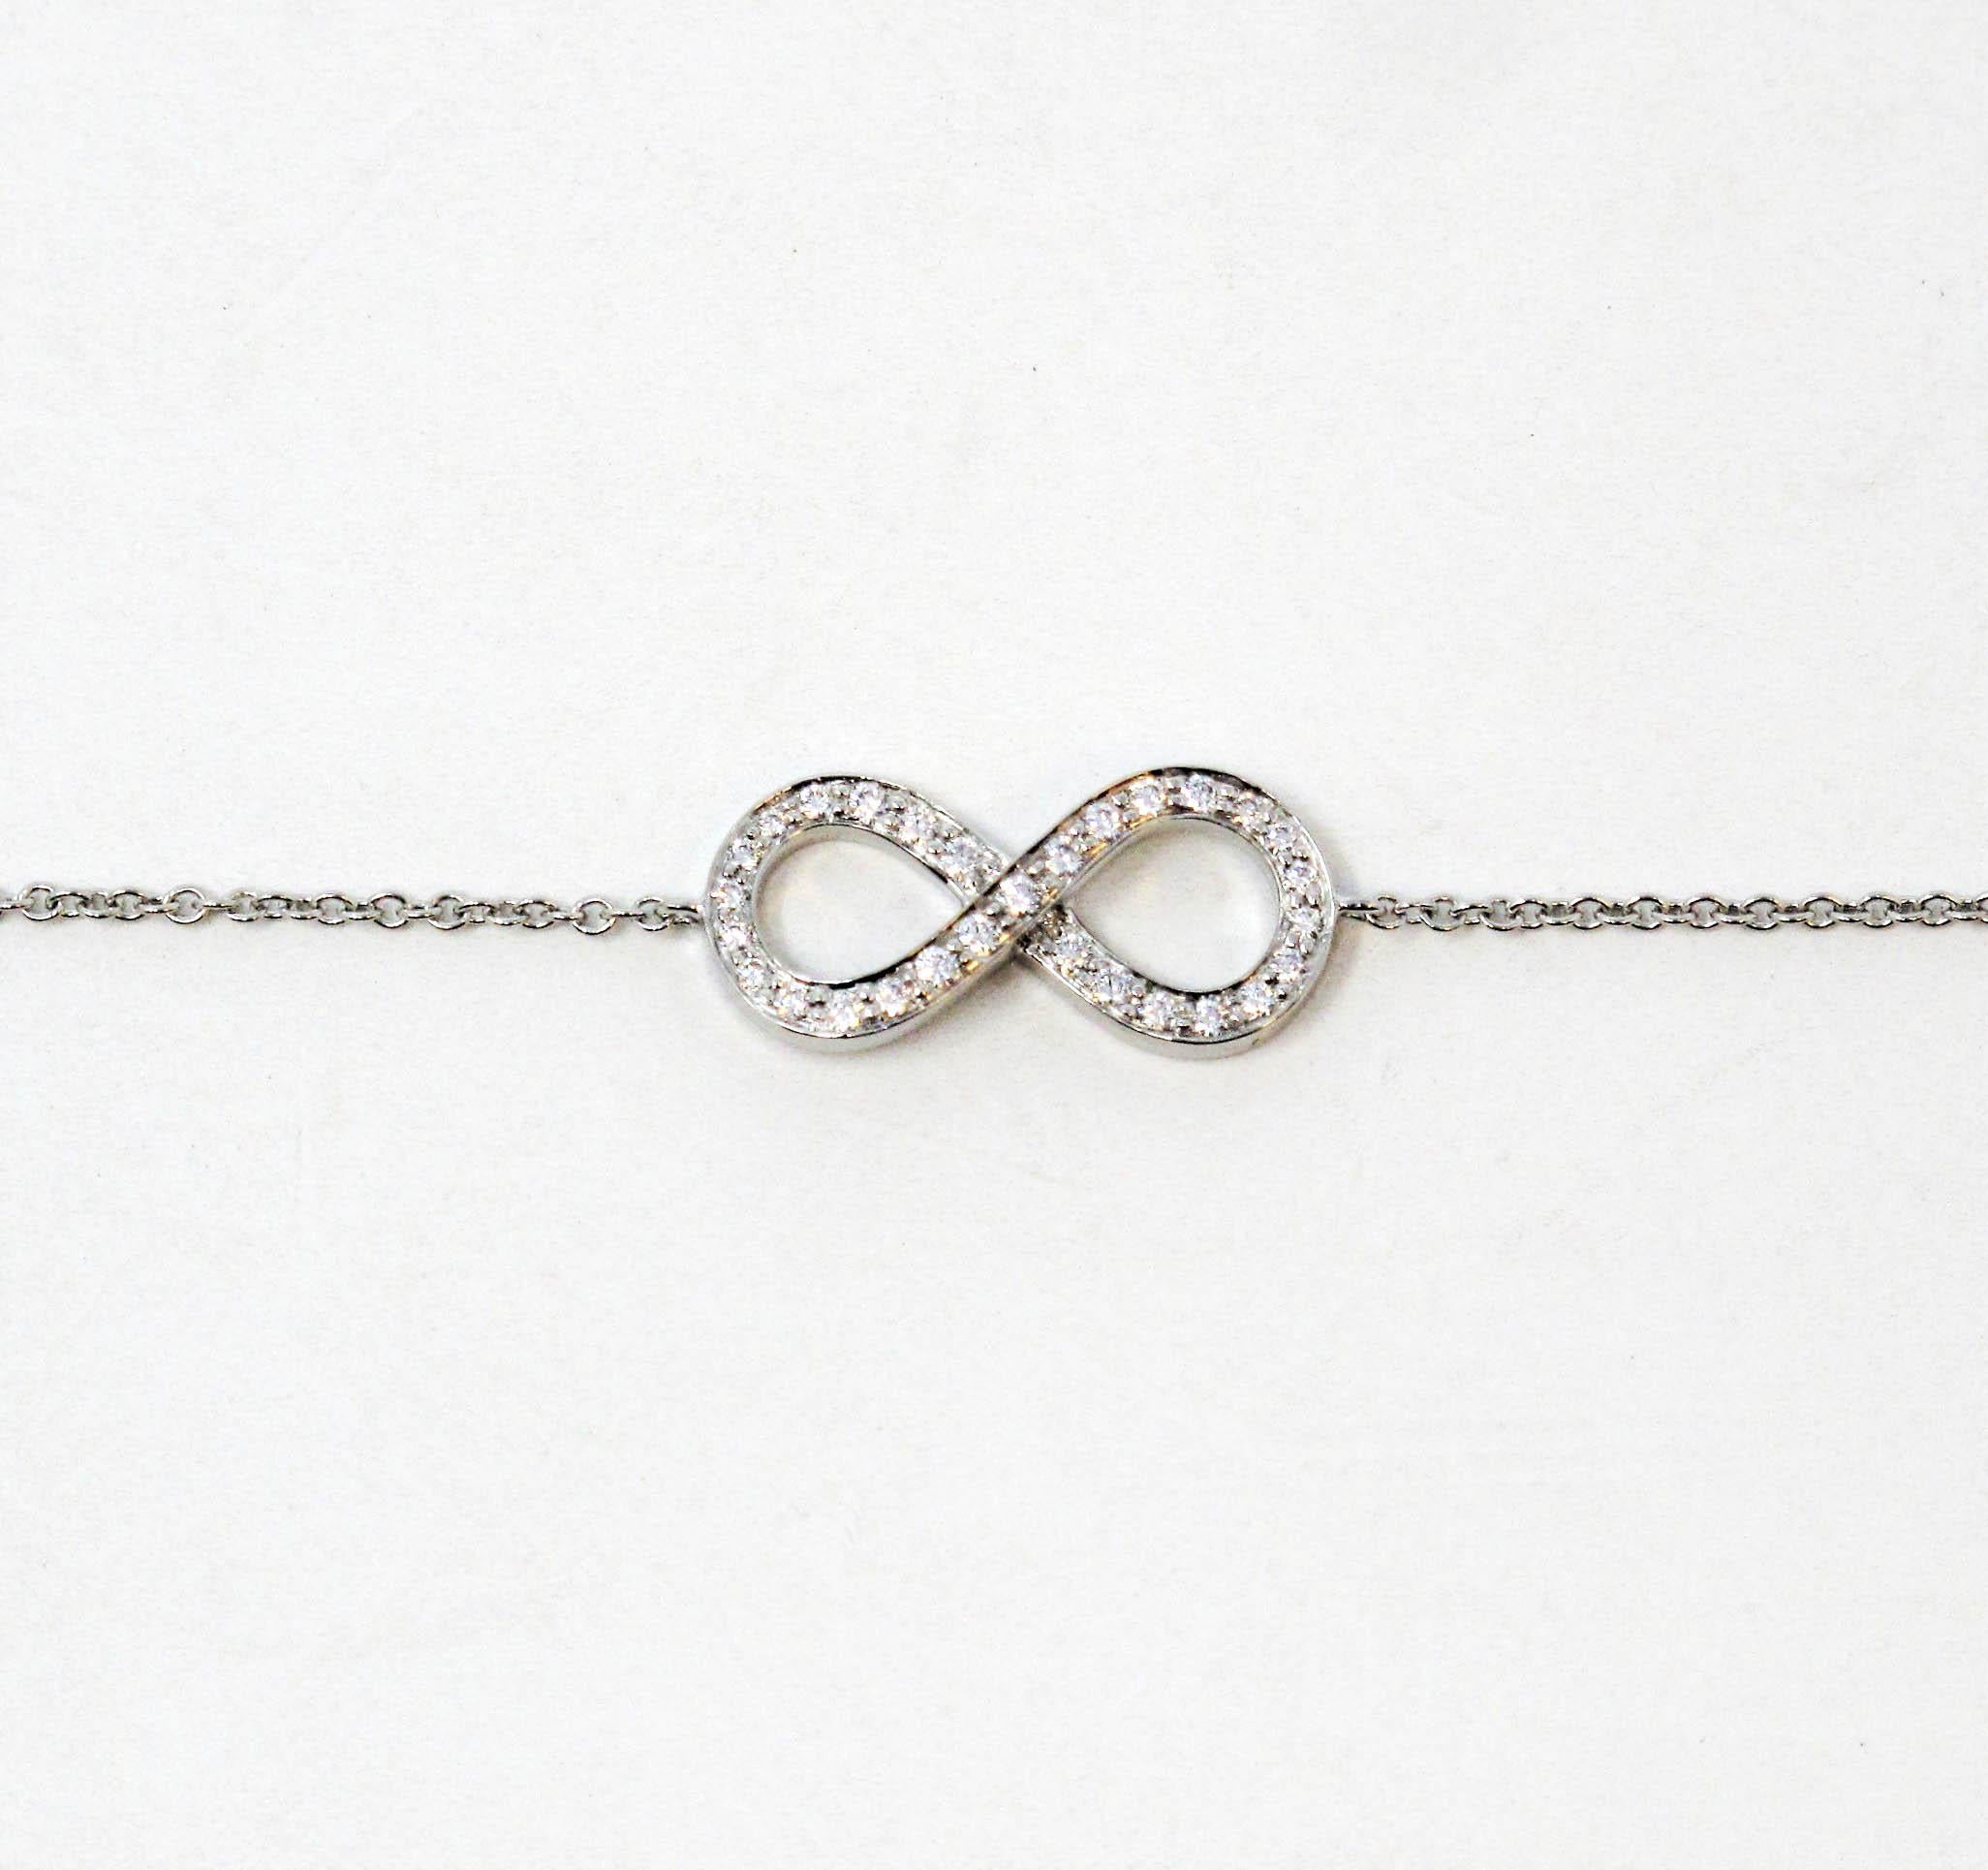 This lovely and delicate Tiffany Infinity chain bracelet will stand the test of time. The timeless infinity symbol is embellished with glittering Tiffany diamonds, while the finely woven platinum chain gently wraps the wrist. This keepsake is truly